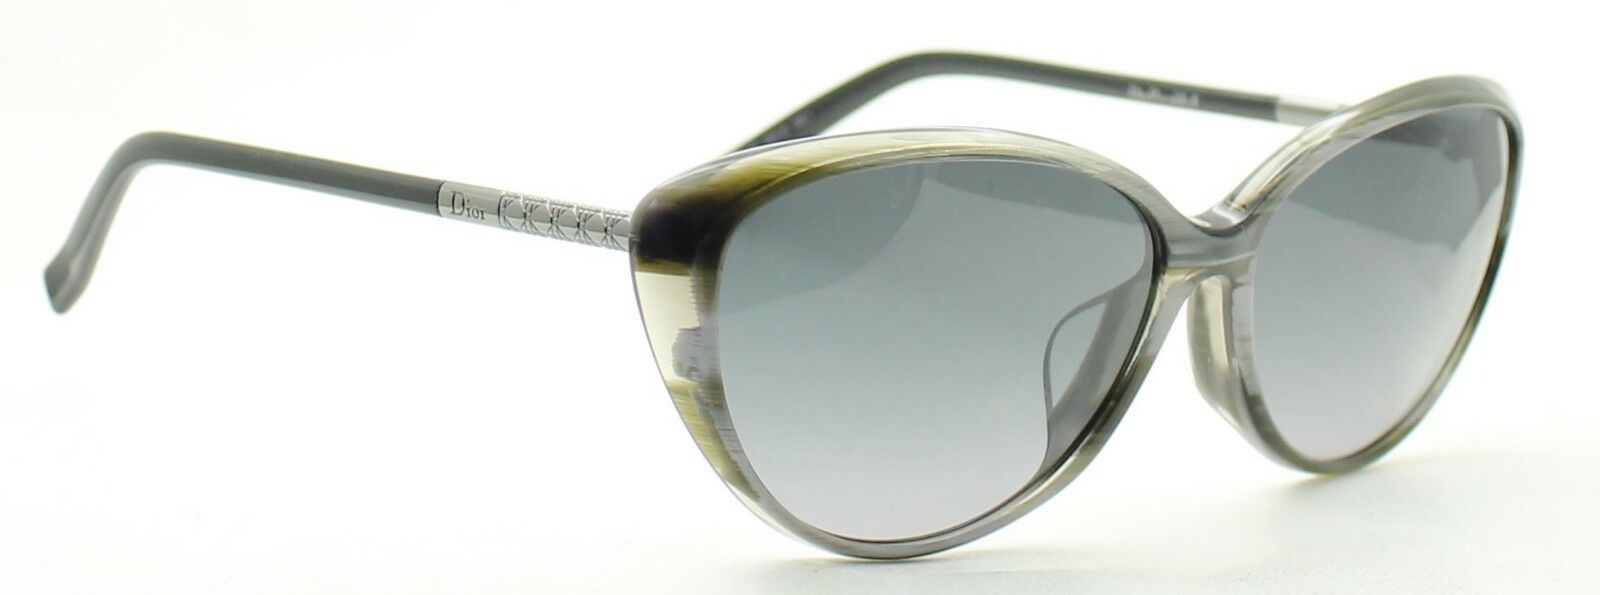 CHRISTIAN DIOR PICCADILLY/S SUNGLASSES at AtoZEyewear.com